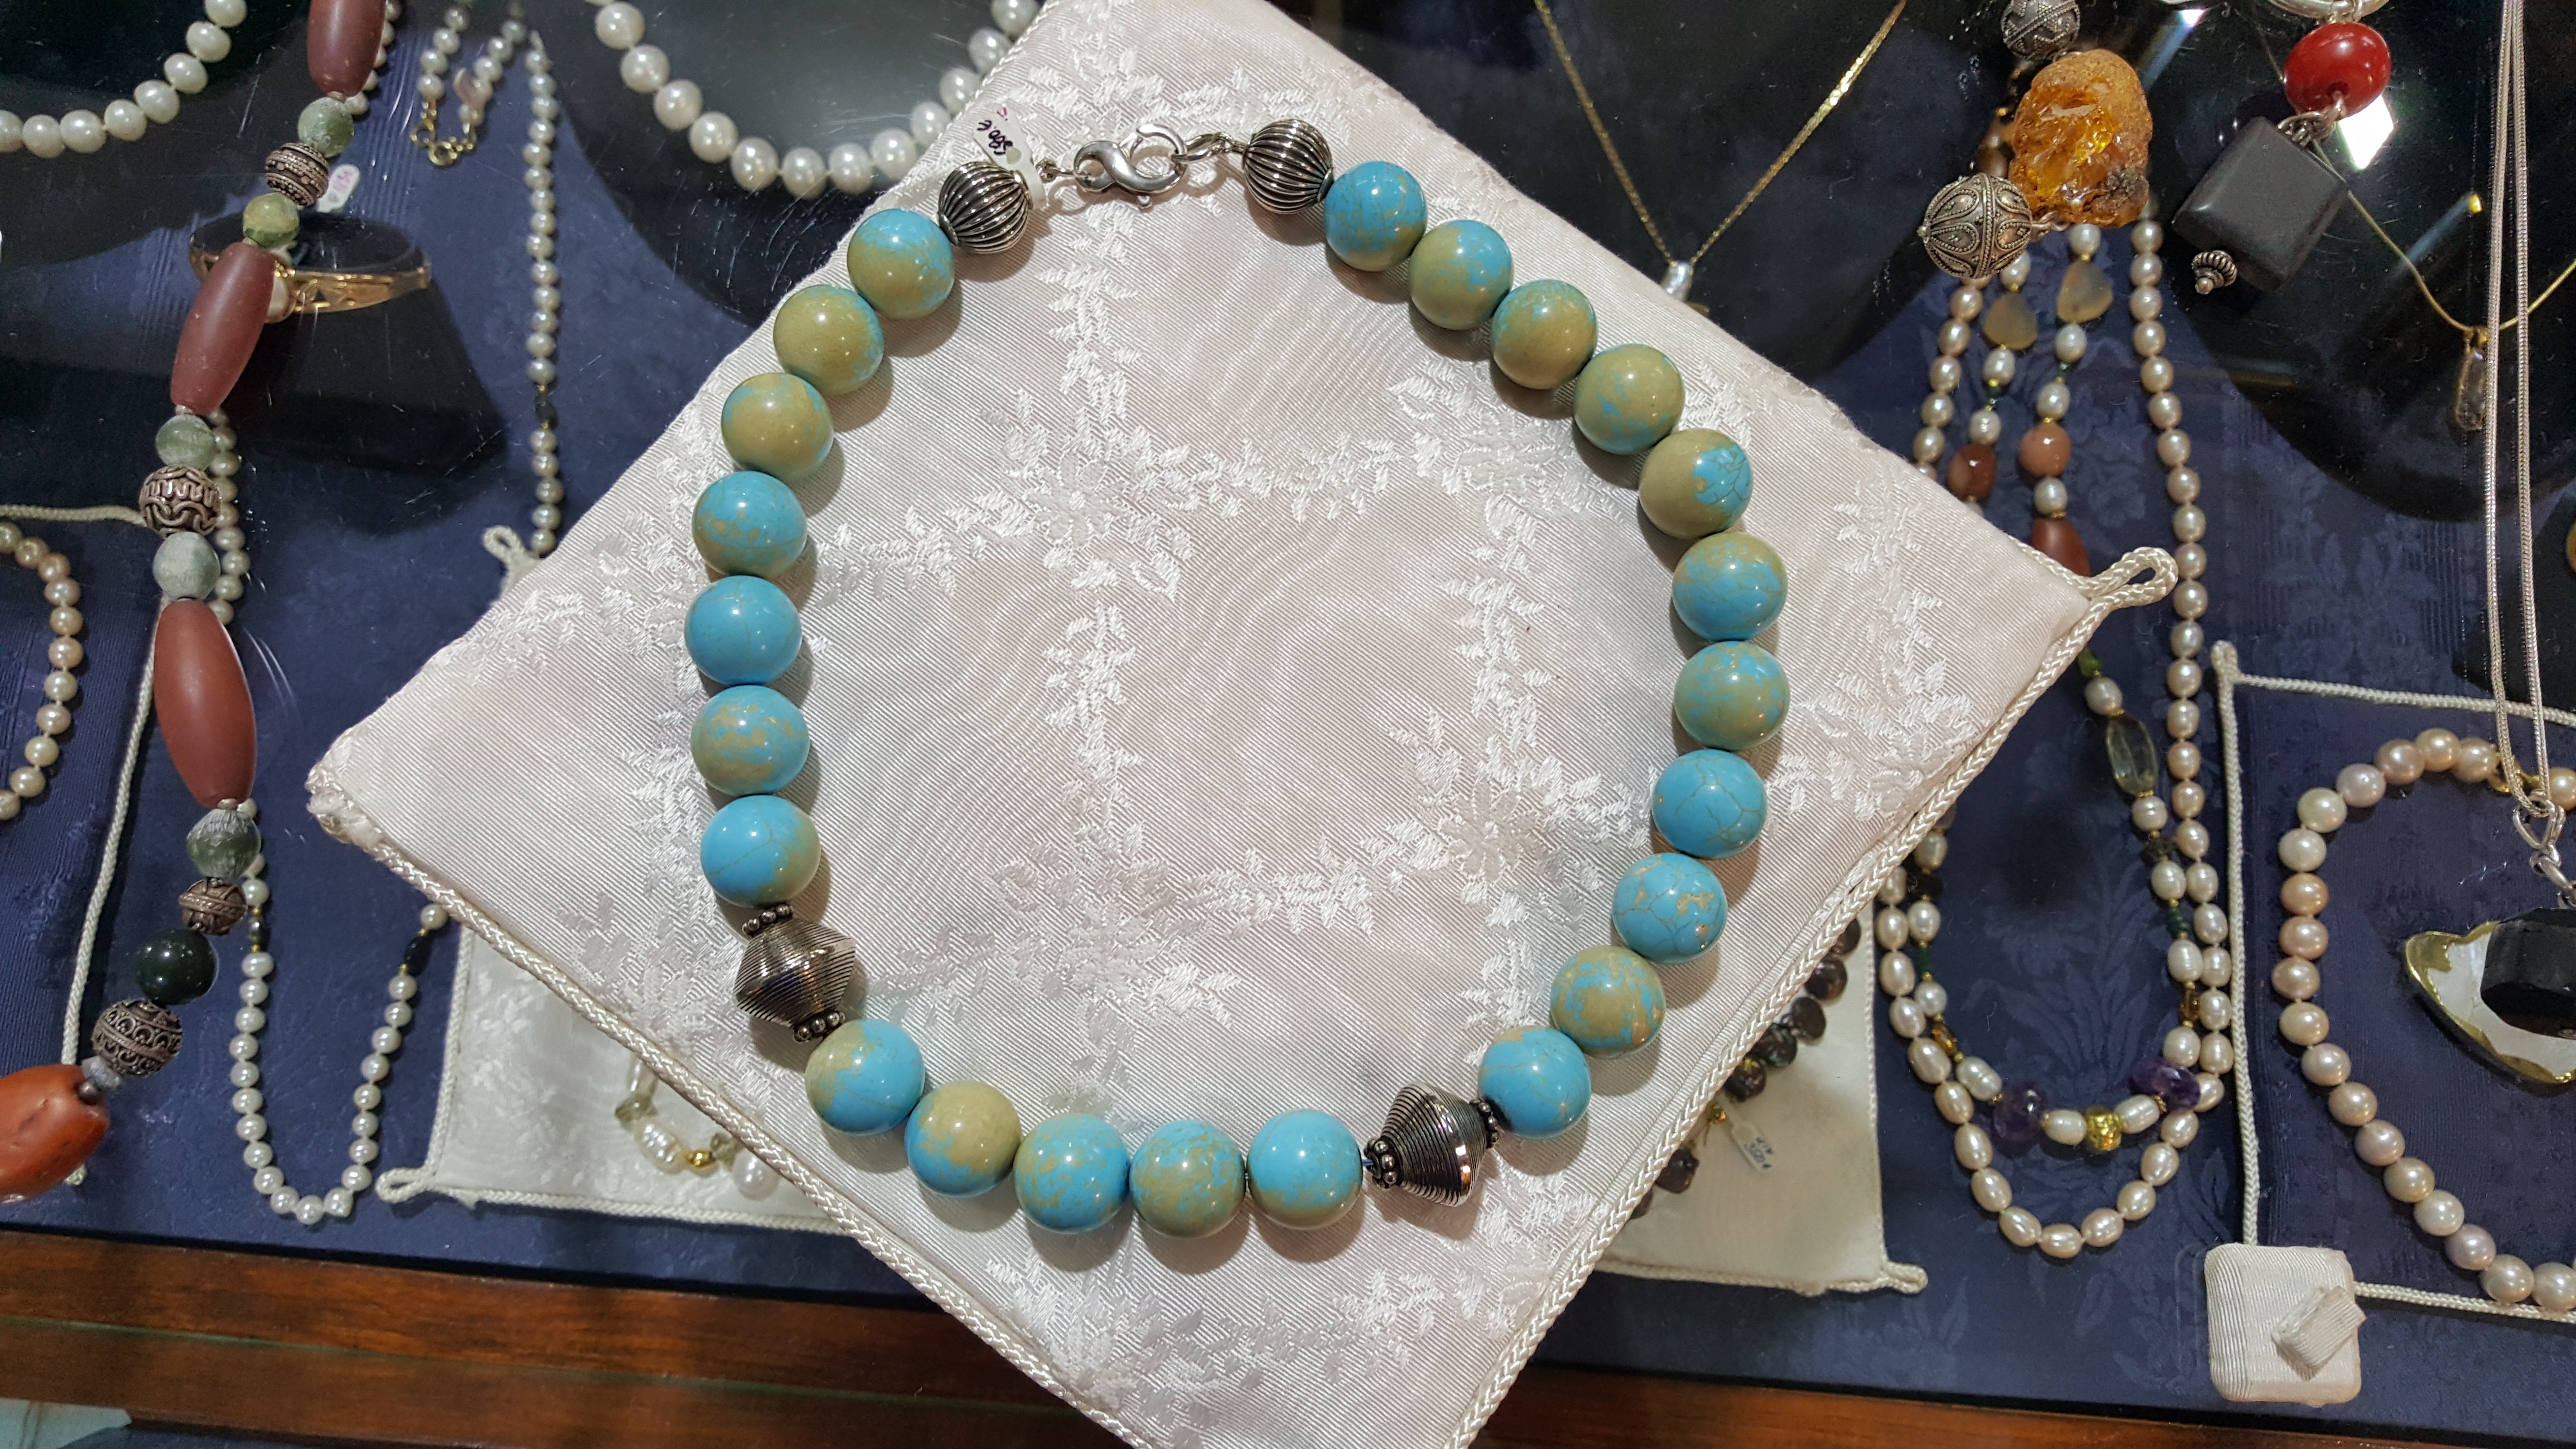 Necklace with old Arizona Turquoise stones & sterling silver elements